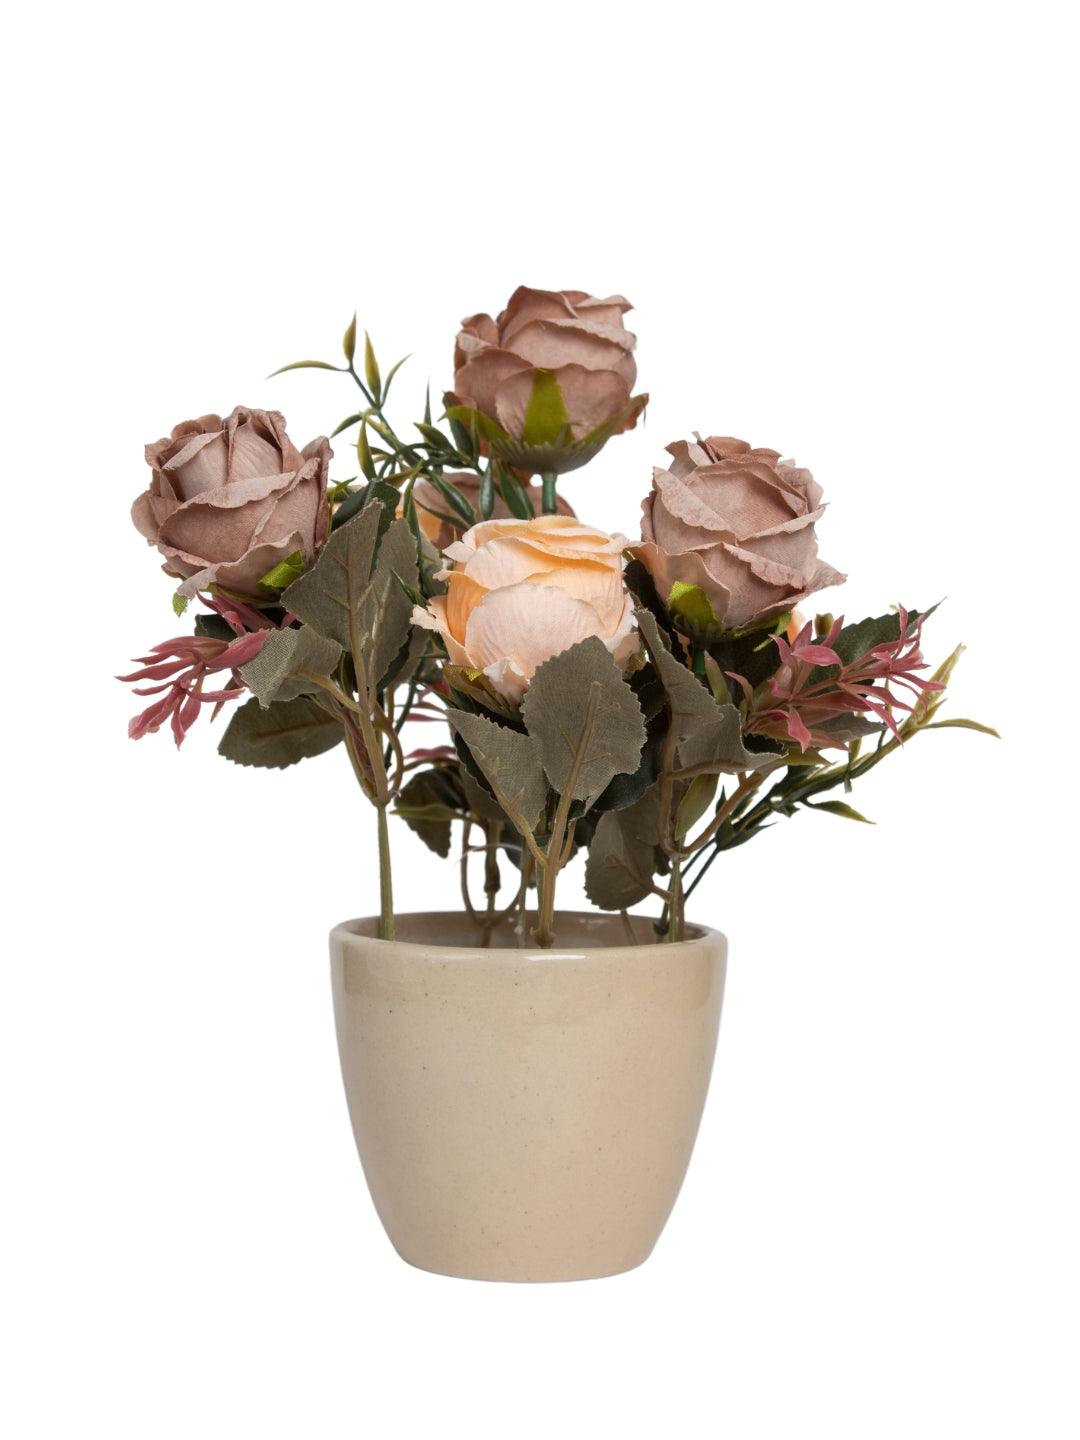 Dried Roses Artificial Flower Container Home Decor - MARKET 99